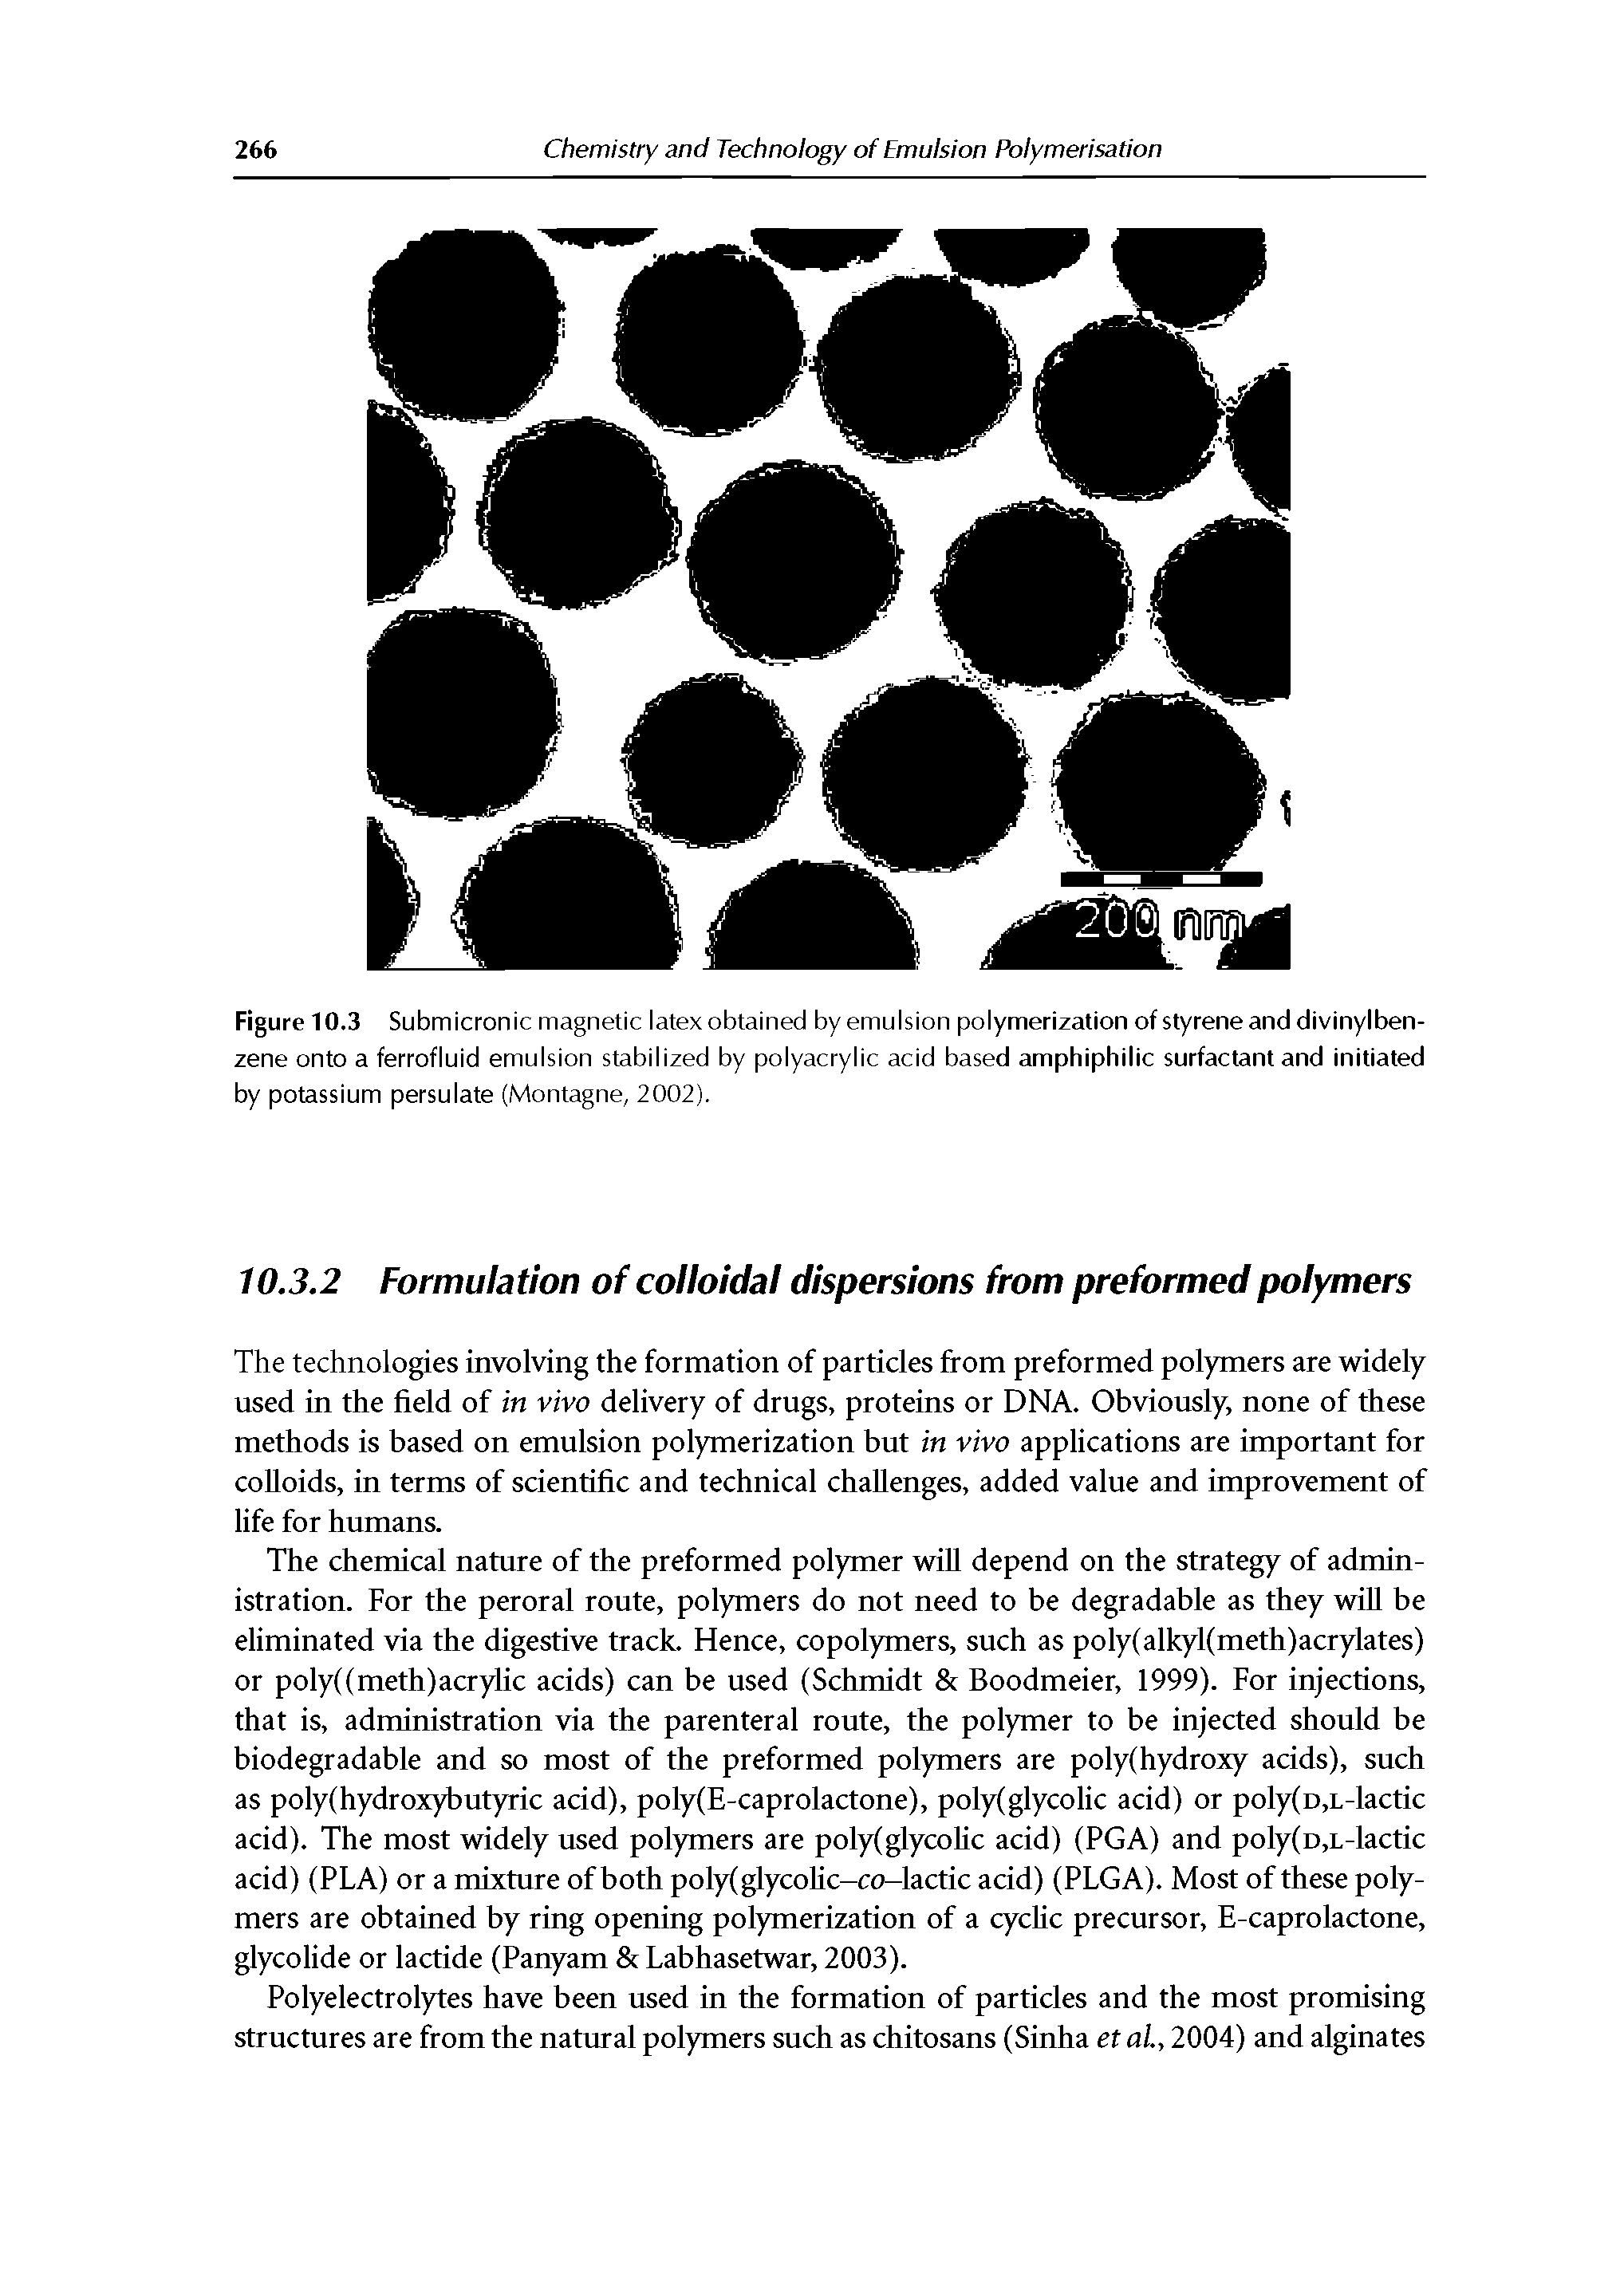 Figure 10.3 Submicronic magnetic latex obtained by emulsion polymerization of styrene and divinylben-zene onto a ferrofluid emulsion stabilized by polyacrylic acid based amphiphilic surfactant and initiated by potassium persulate (Montagne, 2002).